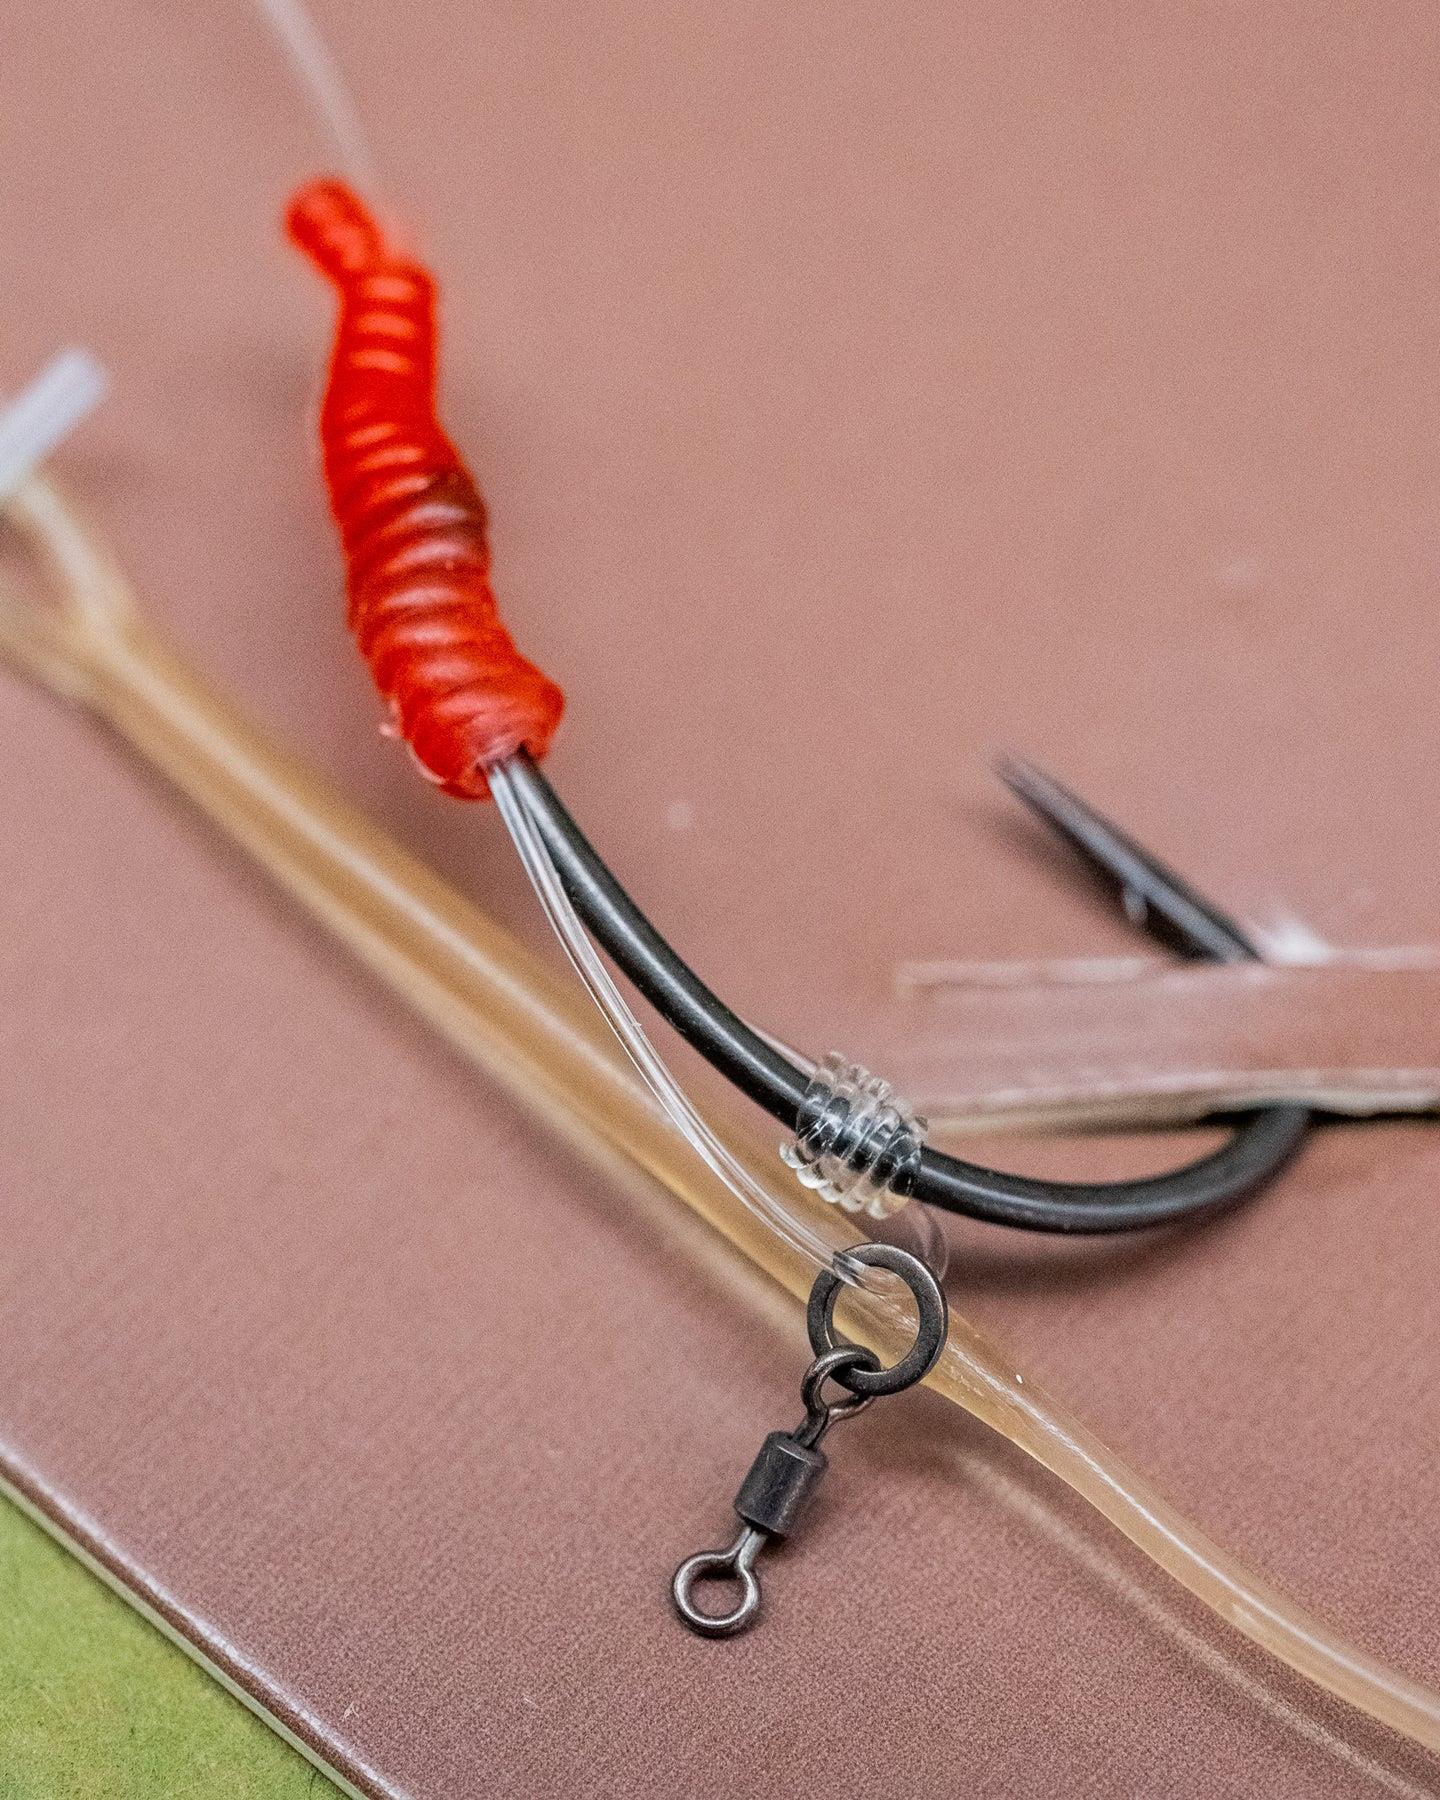 One More Cast Meta Terminal Tackle All-In-1 Rig Fuzed Leader Leadclip D-Rig